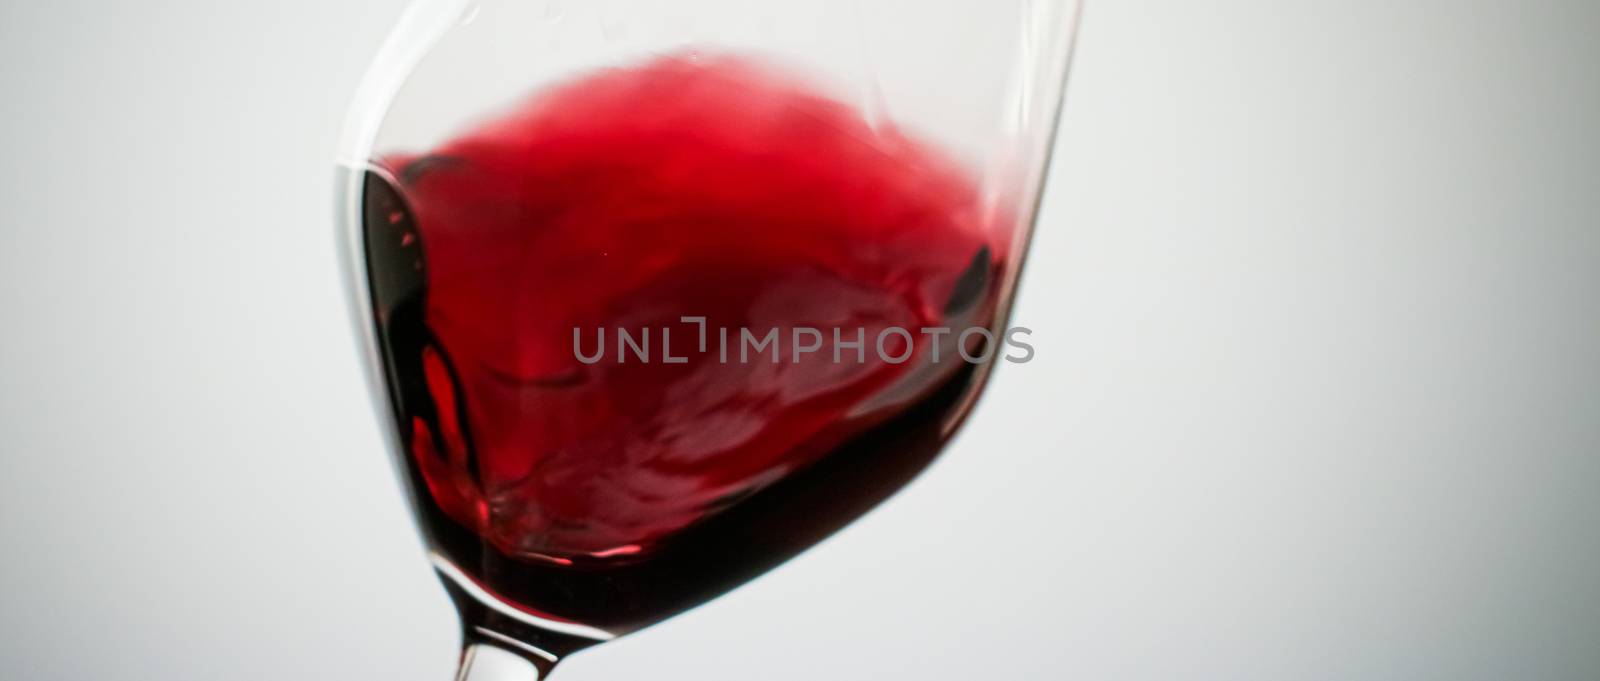 Winery, cheers and winemaking concept - Glass of red wine, pouring drink at luxury holiday tasting event, quality control splashing liquid motion background for oenology or premium viticulture brand